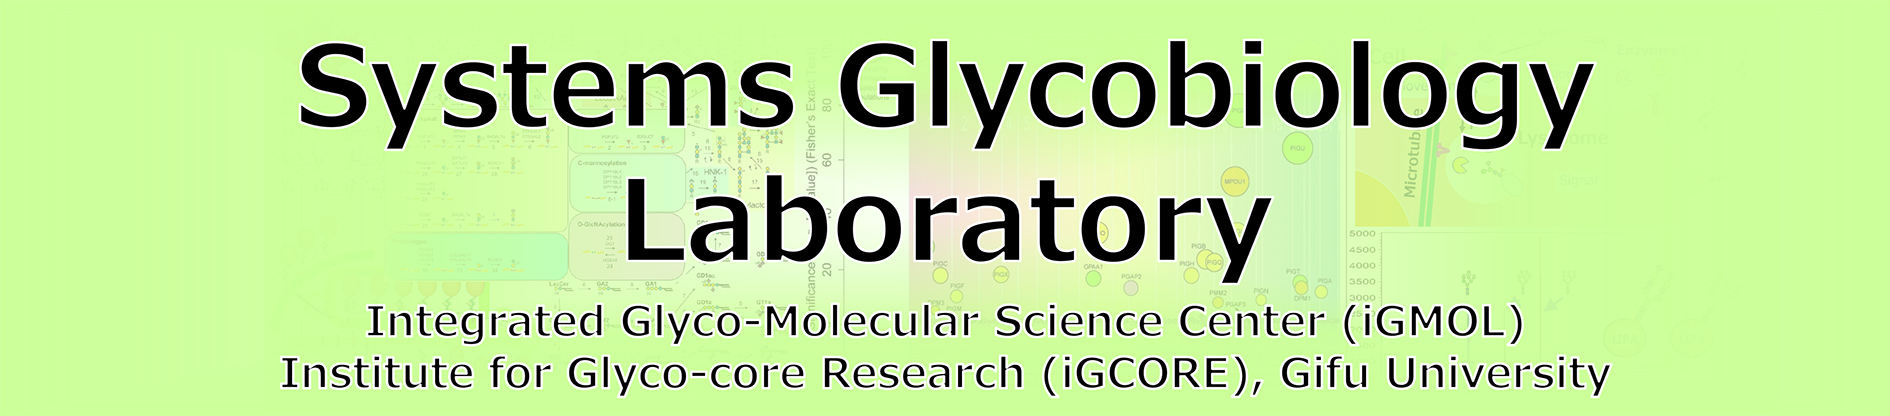 Systems Glycobiology Laboratory, Institute for Glyco-Core Research (iGCORE), Gifu University